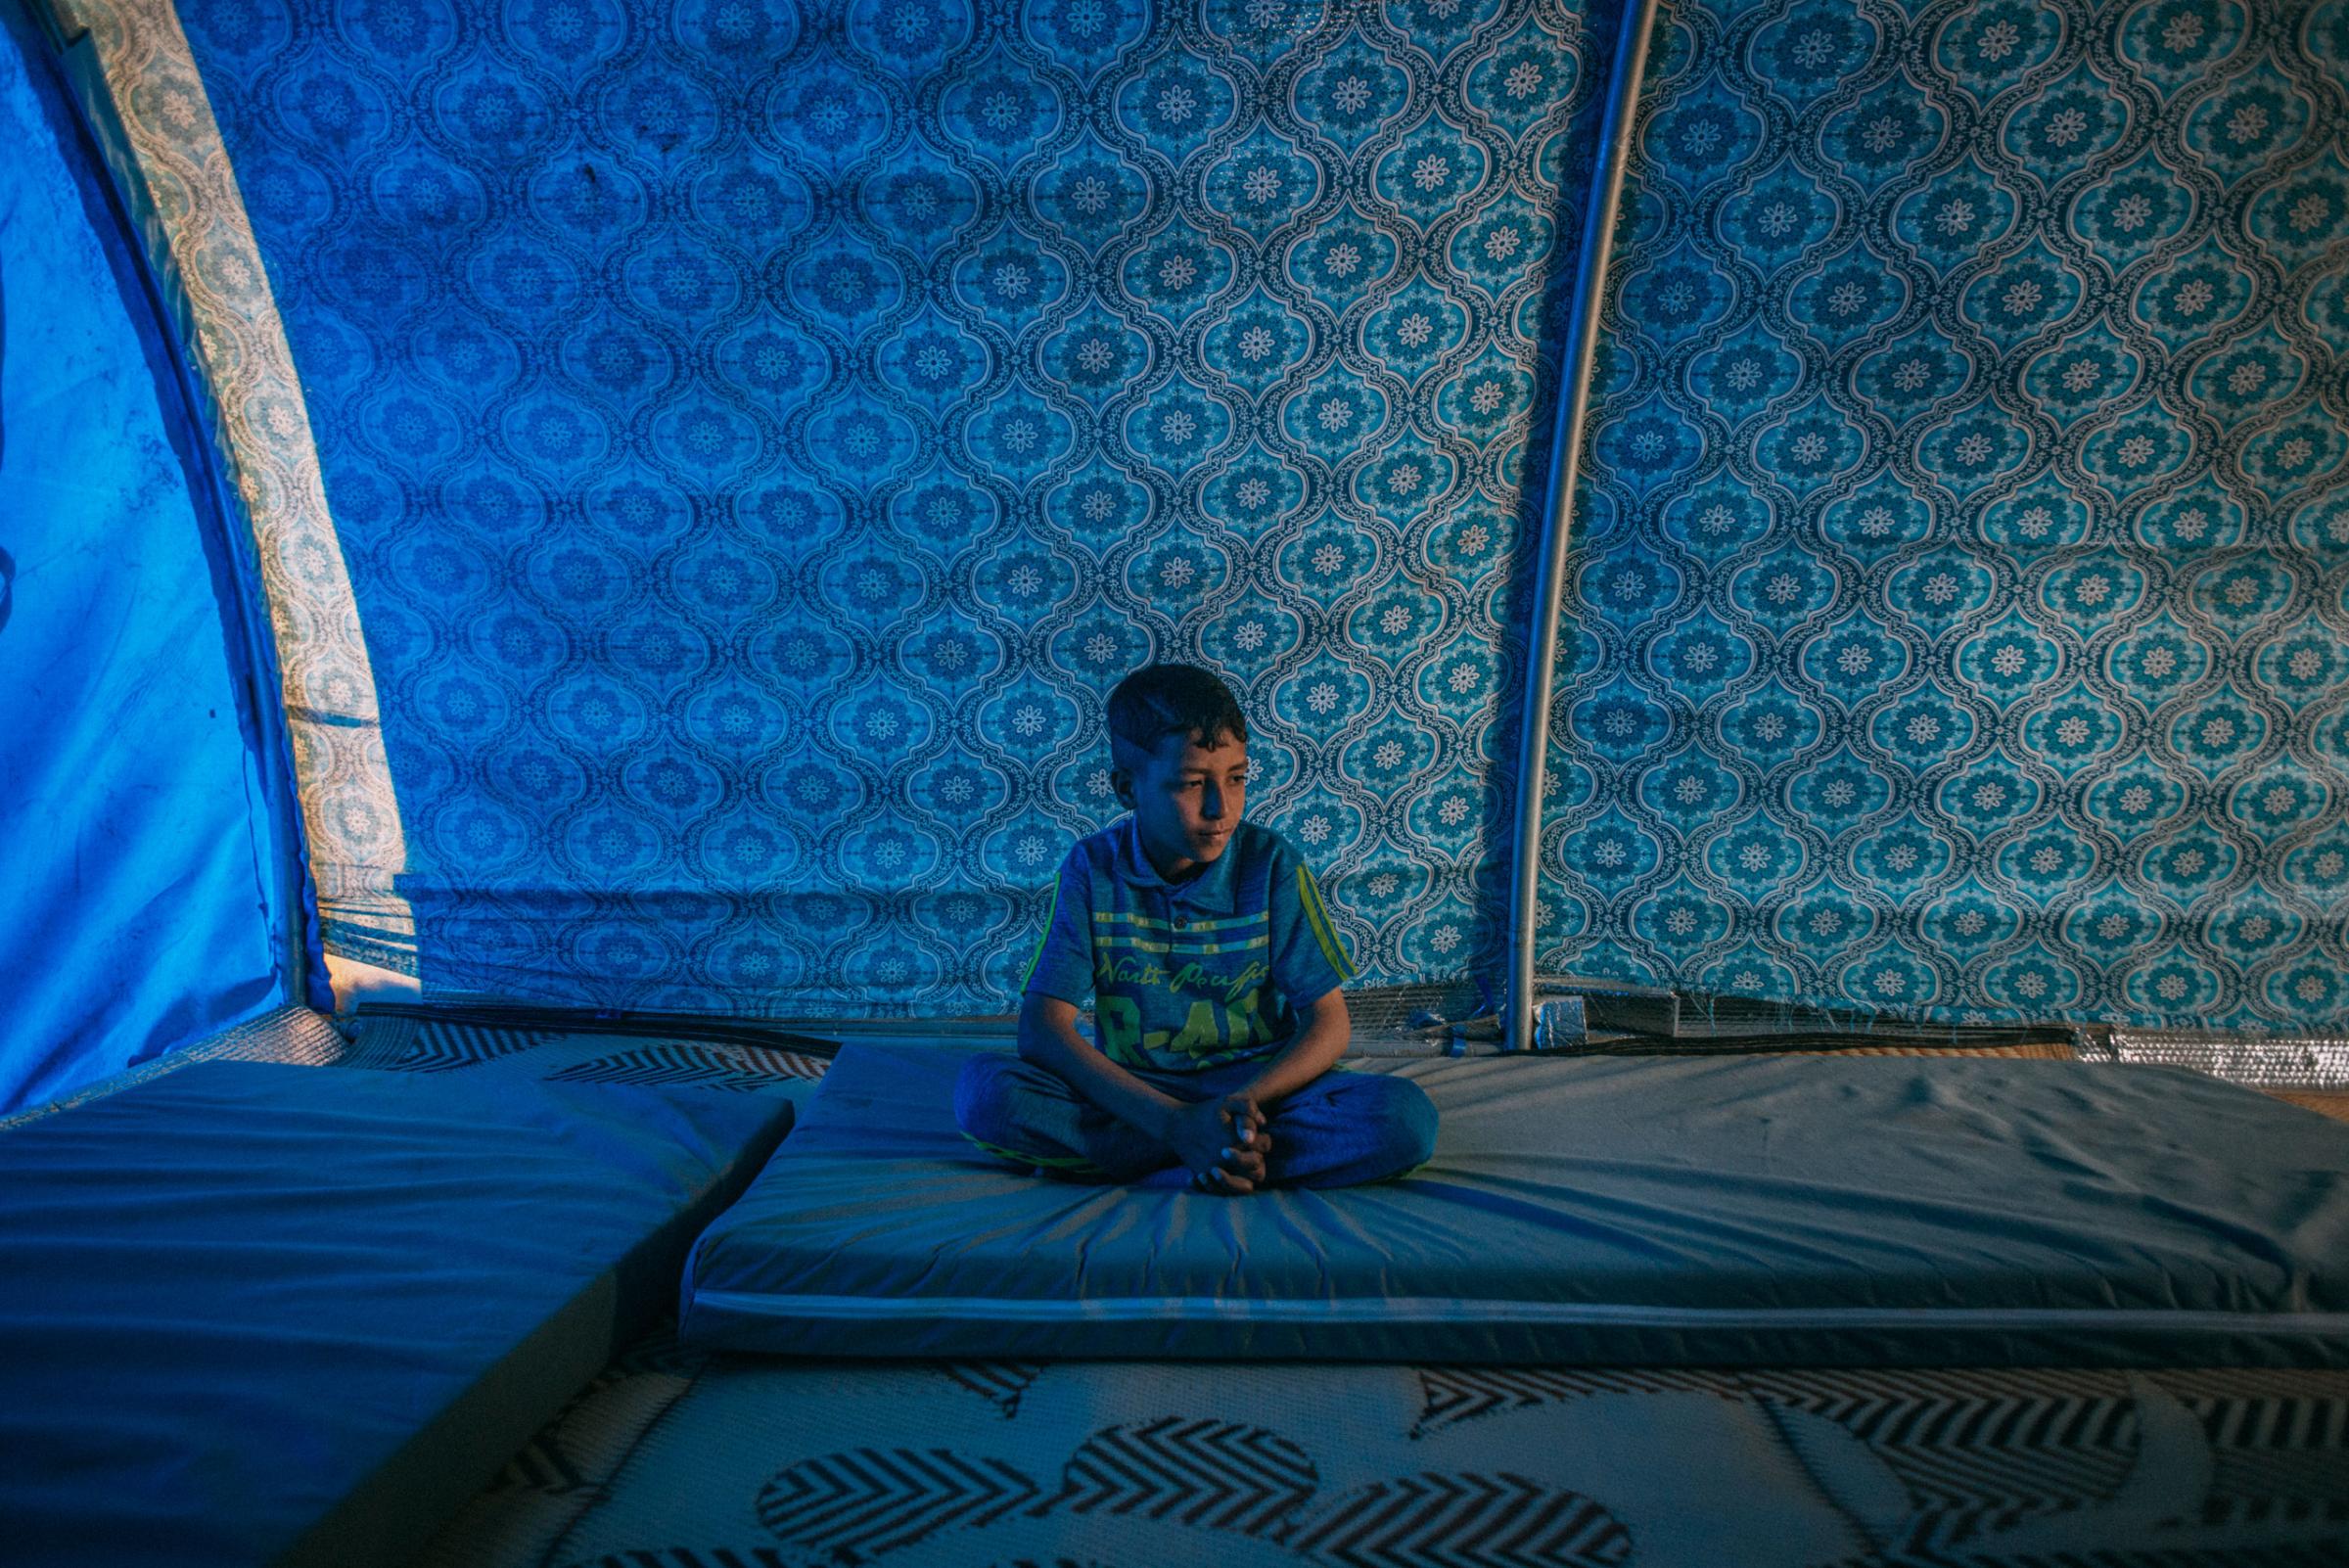 Ayman Mohamed Ahmed lives in the Hamam al-Alil displacement camp south of Mosul. On April 6, 2017, he answered a few questions about his recent days in this war zone. His most recent meal? Rice and beans. What does he think about at night? "I hope ISIS members do not come and blow themselves up in our house." His favorite toy? He doesn't have toys in the camp, but back at home it was a car. What does he want to be when he grows up? A doctor, because that's "the best" and he wants to help people.